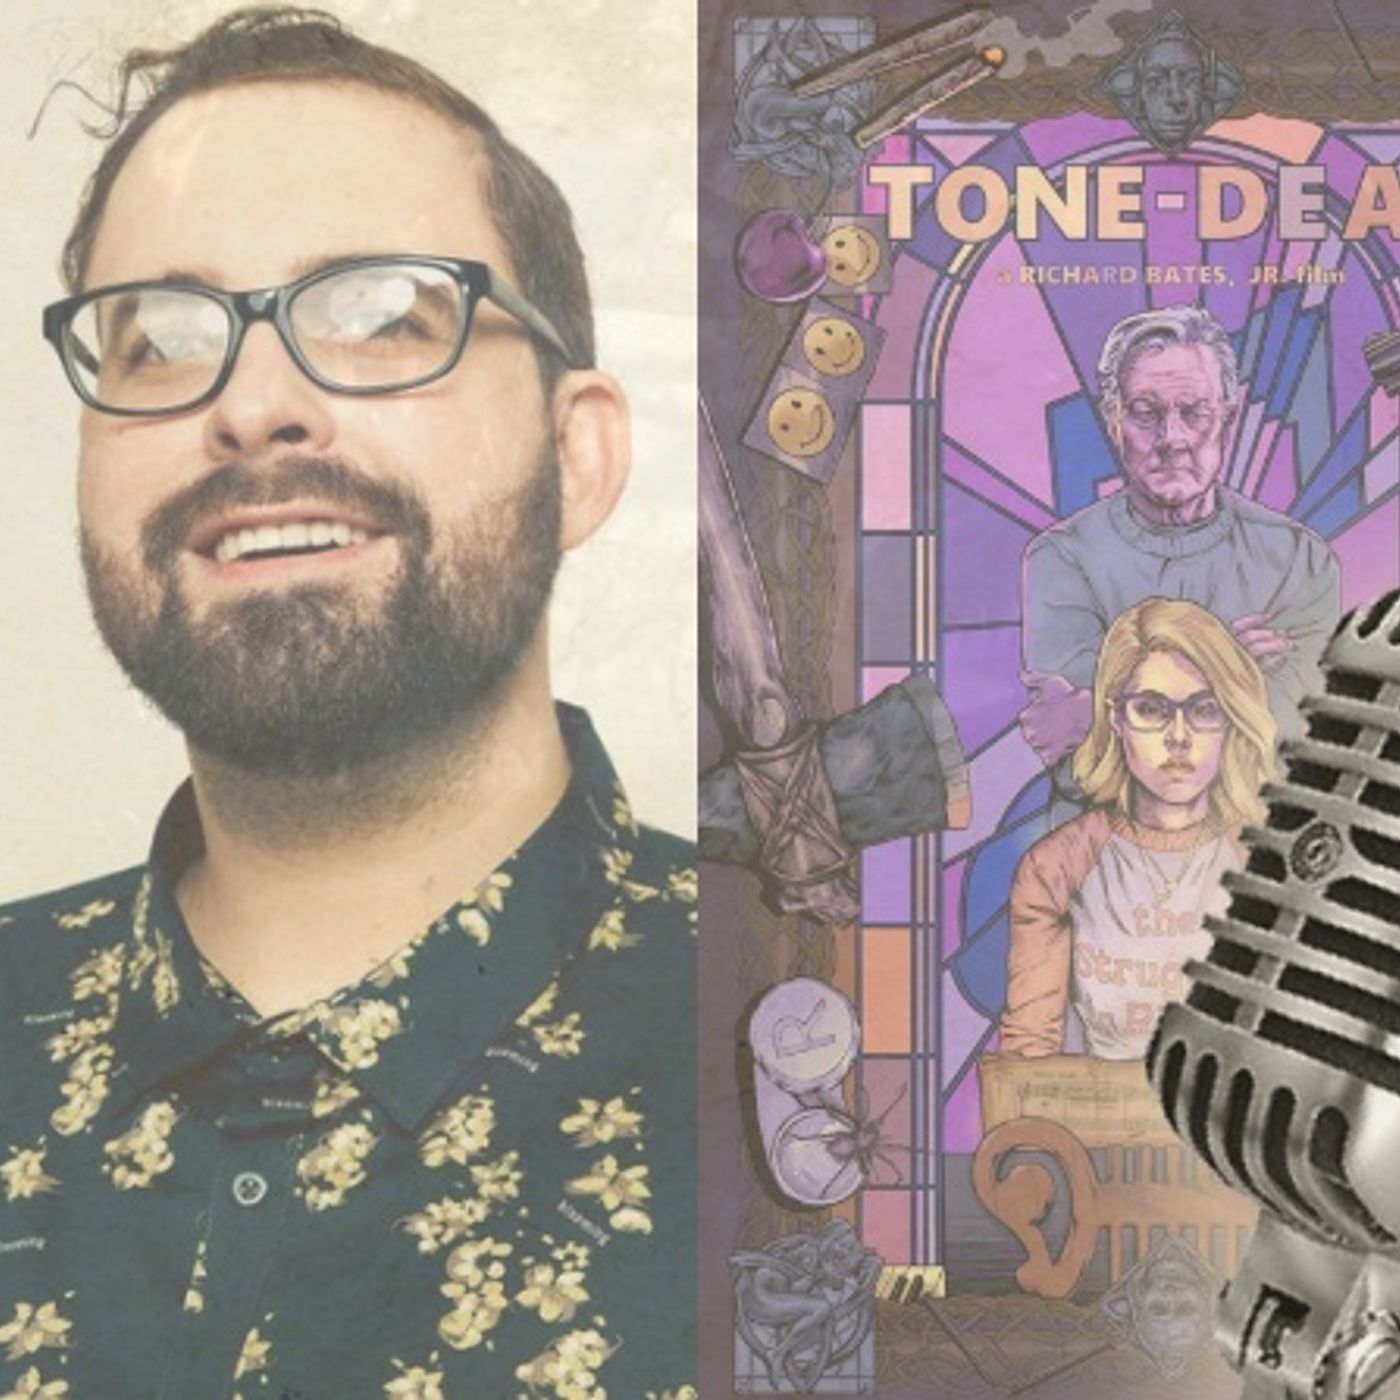 Interview with Richard Bates Jr. - Director of Tone-Deaf